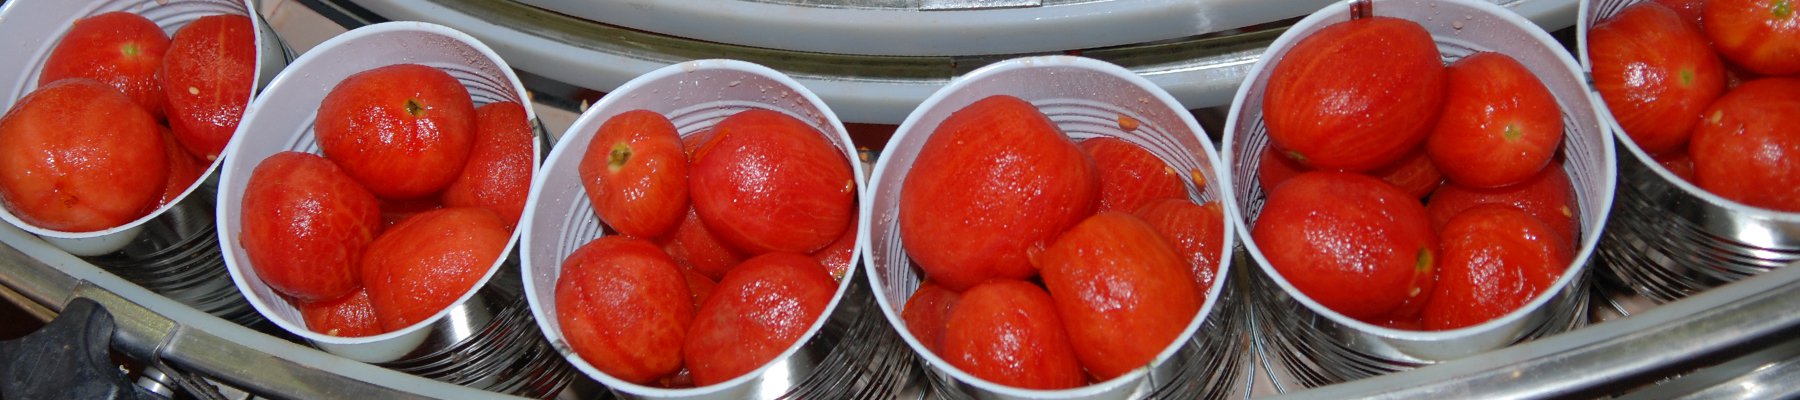 Peeled tomatoes being canned